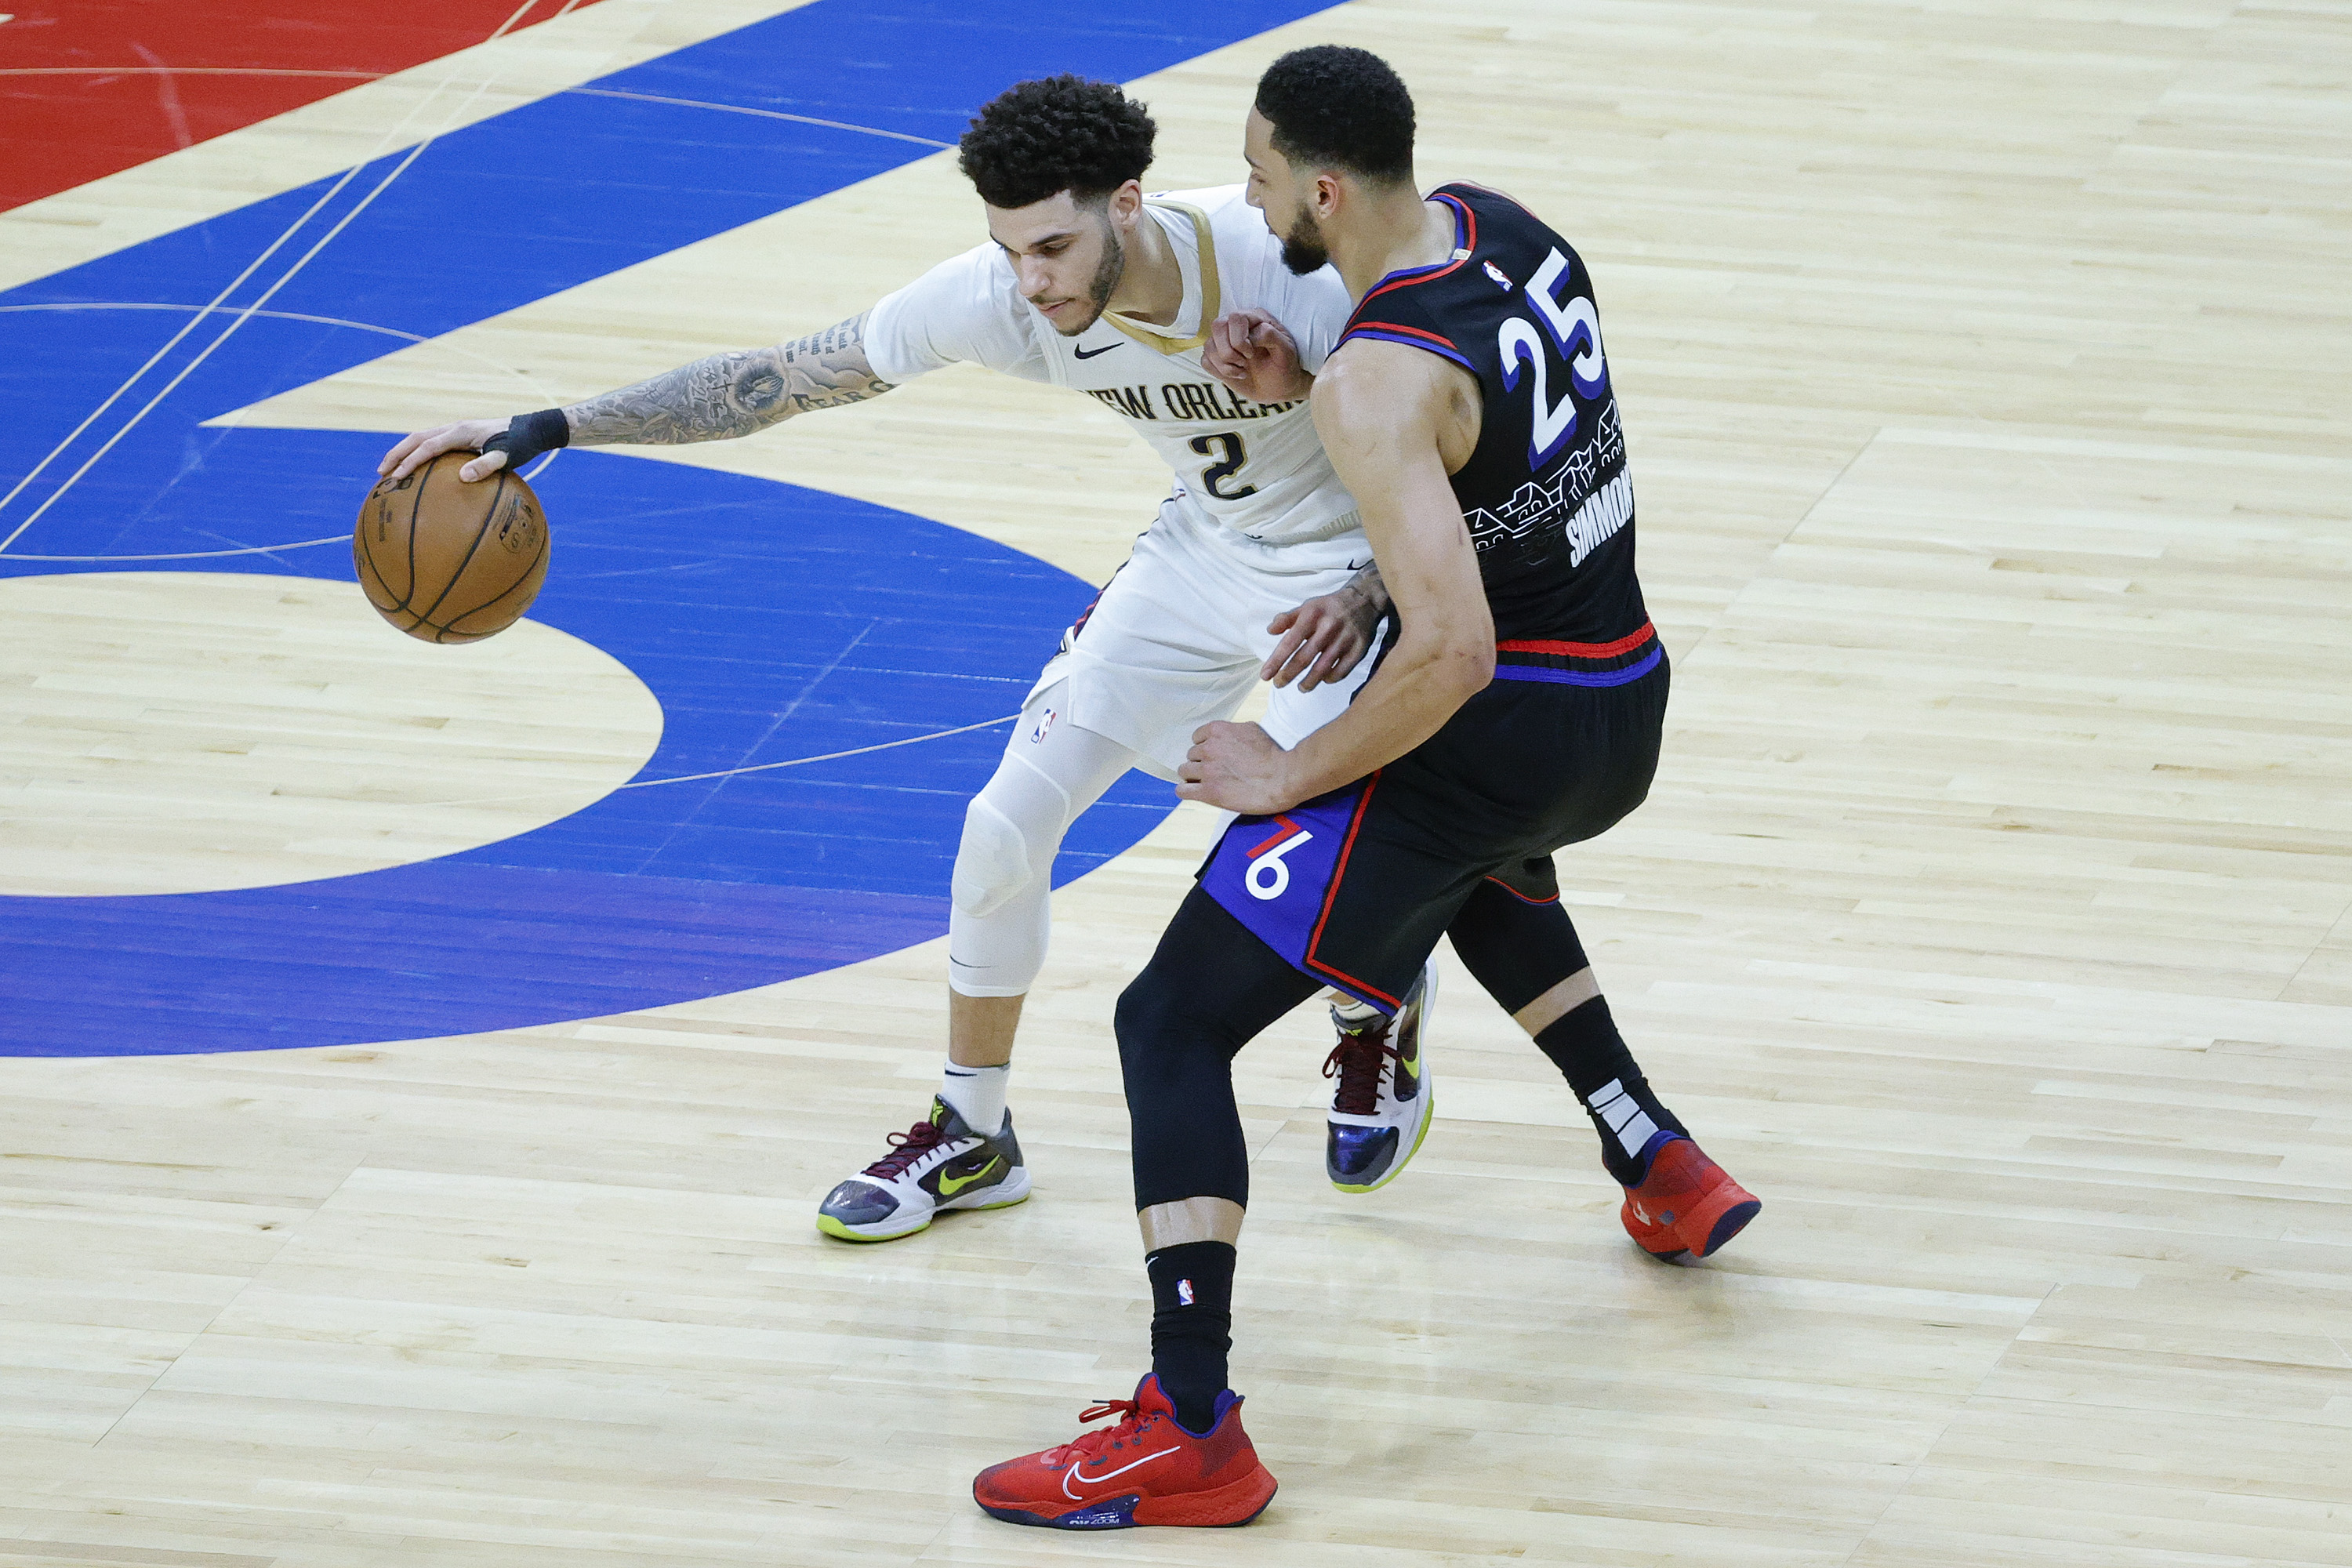 Philadelphia 76ers guard Ben Simmons defends former New Orleans Pelicans and current Chicago Bulls point guard Lonzo Ball during a game in May 2021